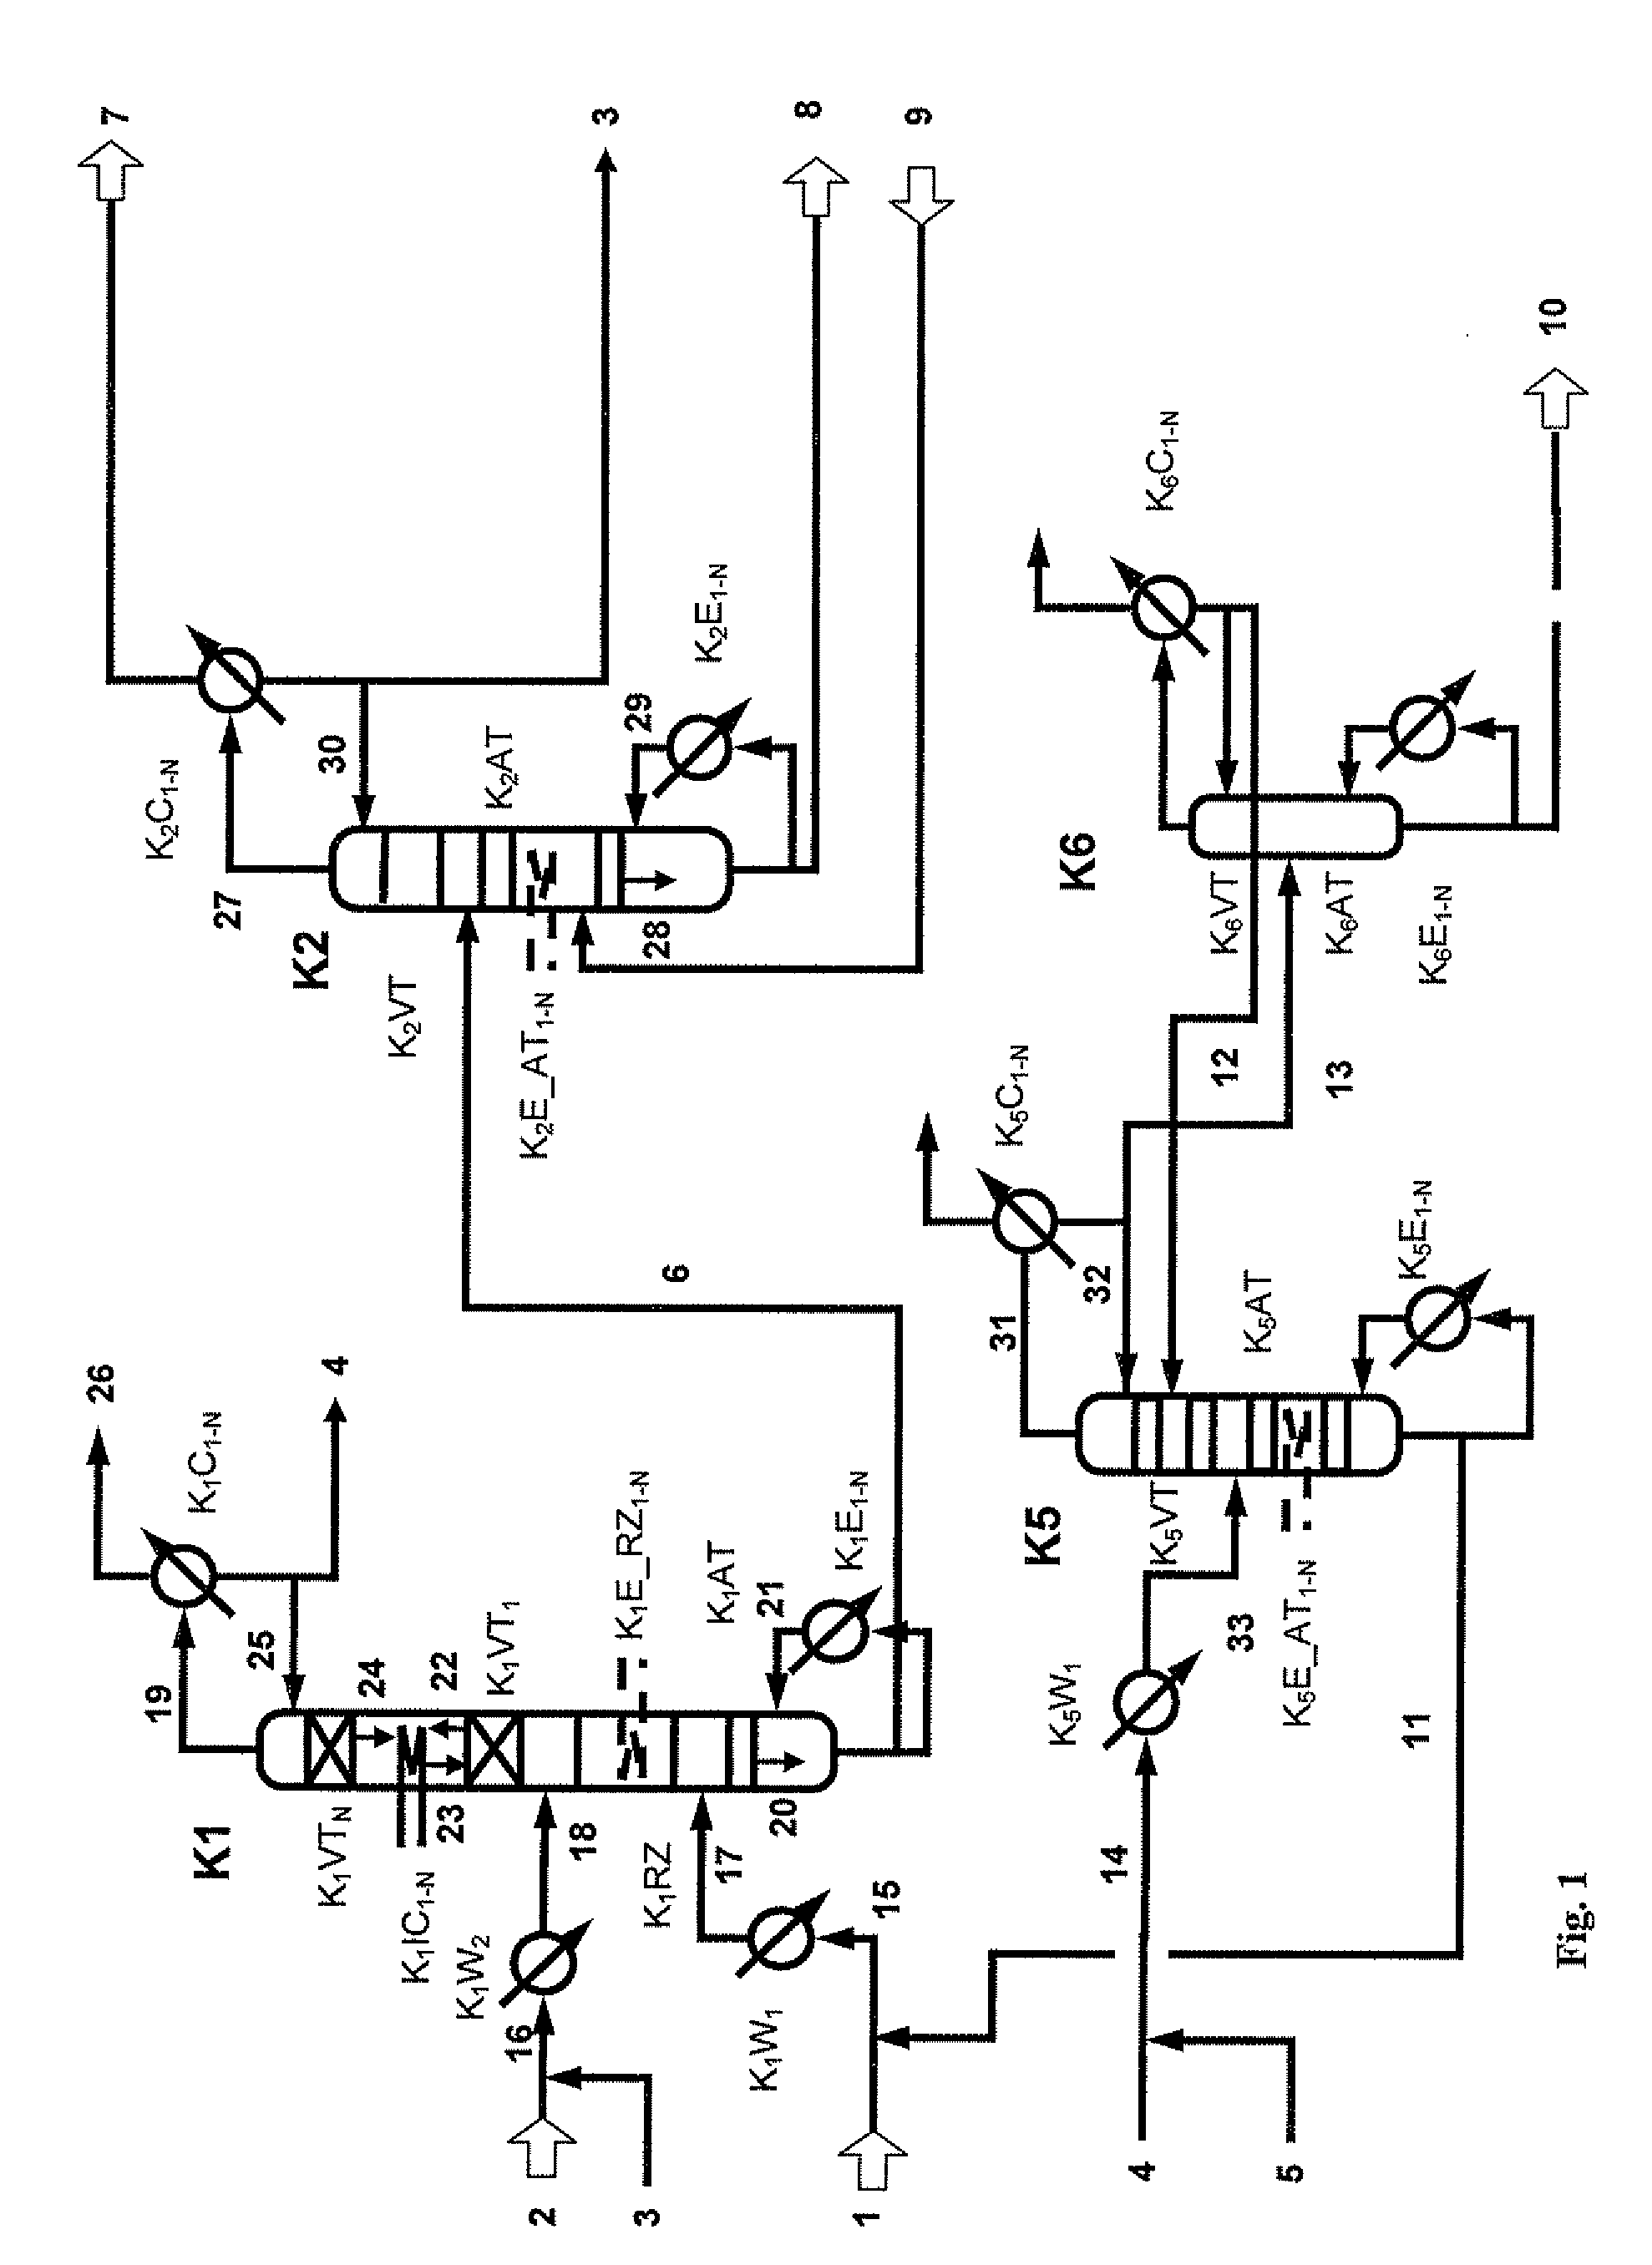 Processes for preparing diaryl and/or alkylaryl carbonates from dialkyl carbonates